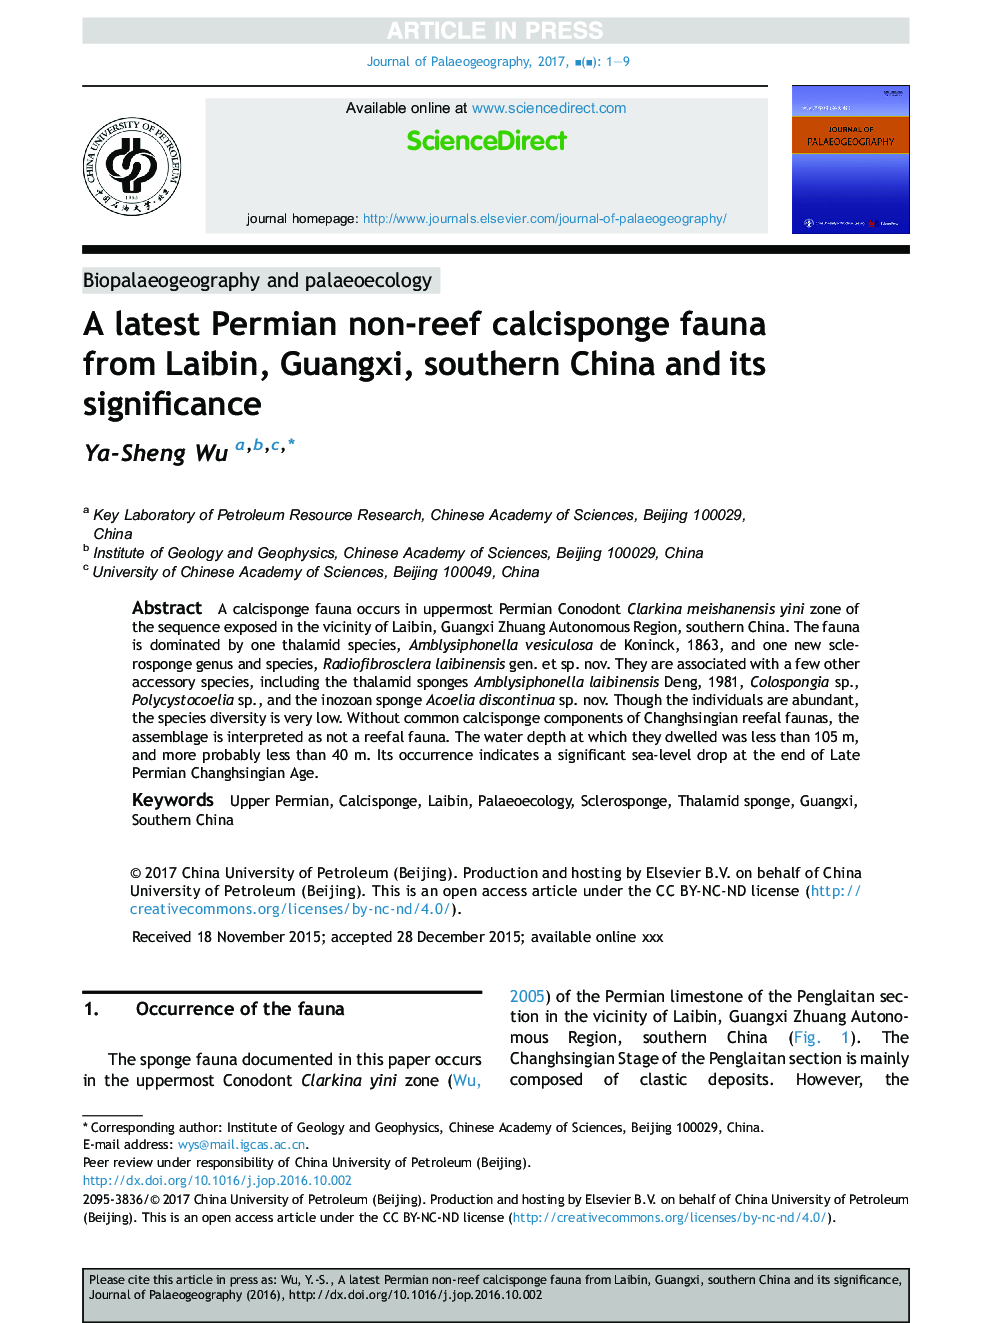 A latest Permian non-reef calcisponge fauna from Laibin, Guangxi, southern China and its significance